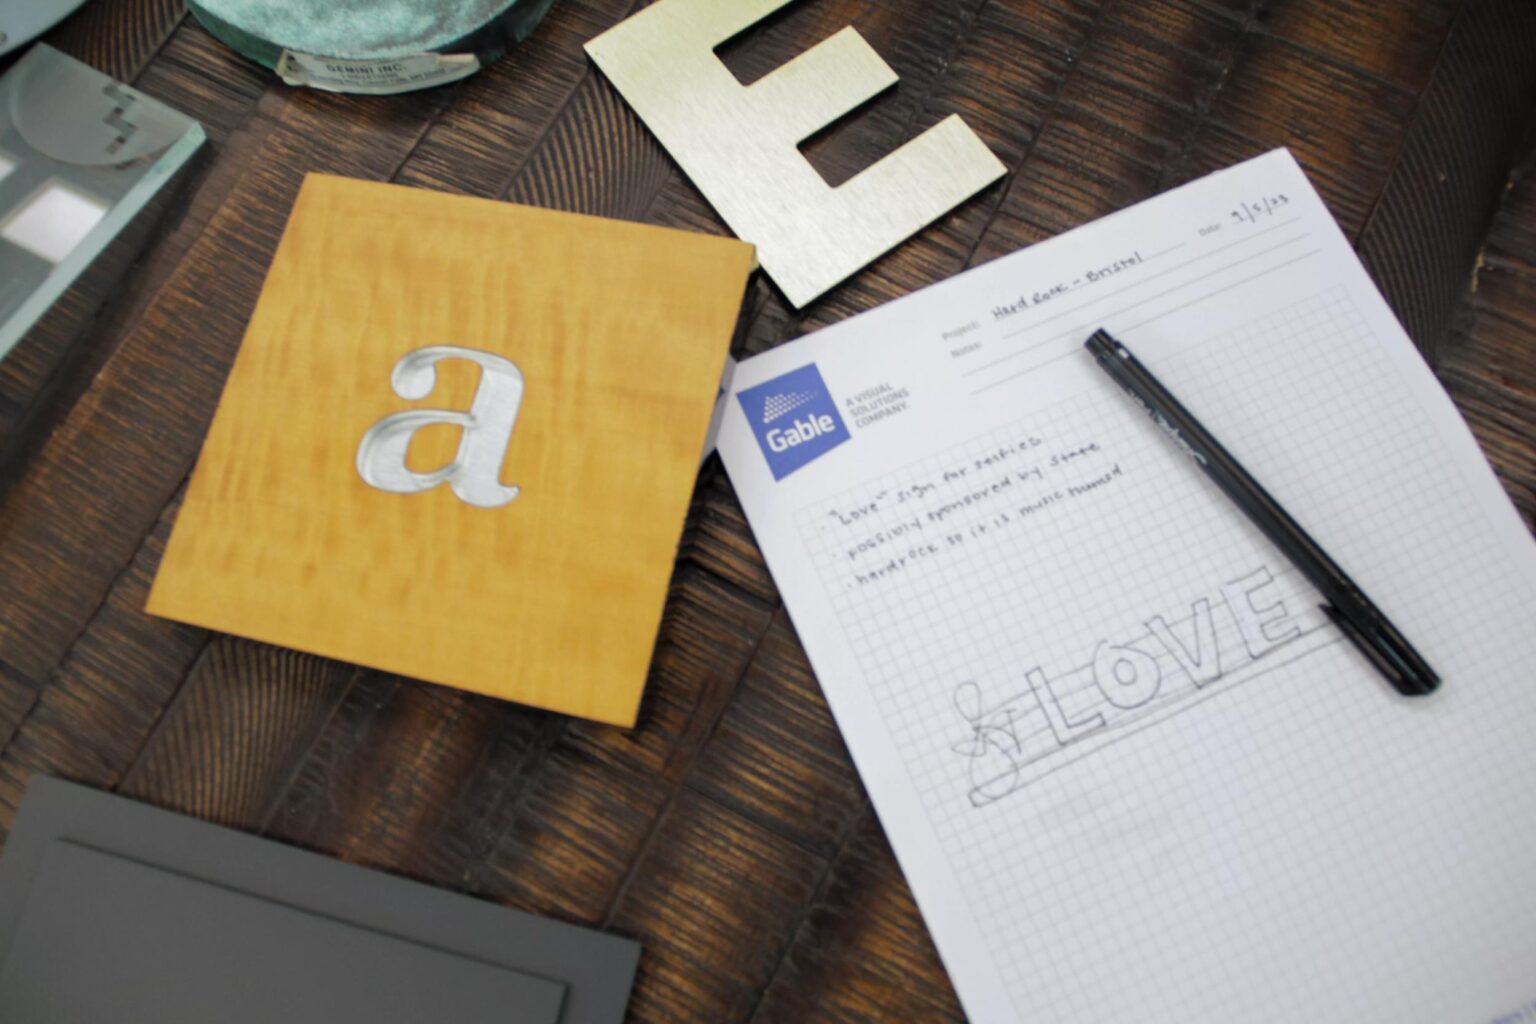 Sample letters with a note pad on a table